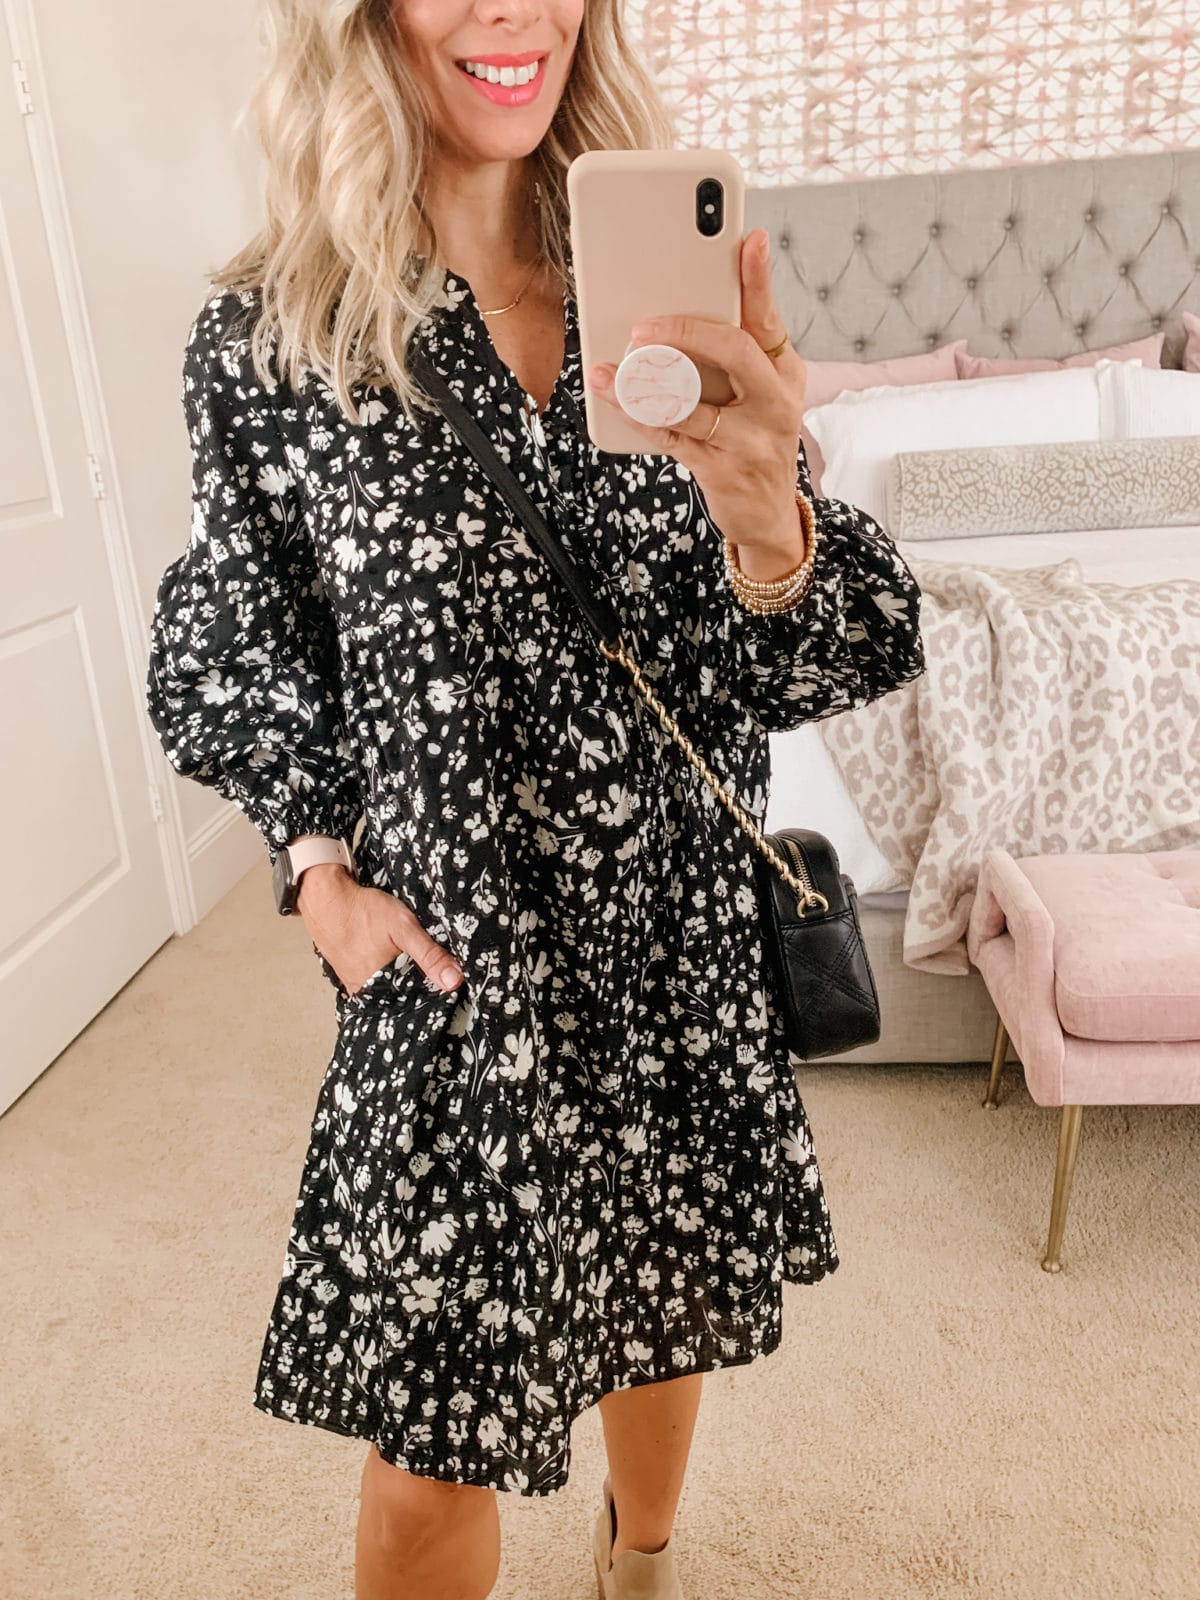 Target Fashion Finds, Dress, Booties, Crossbody 